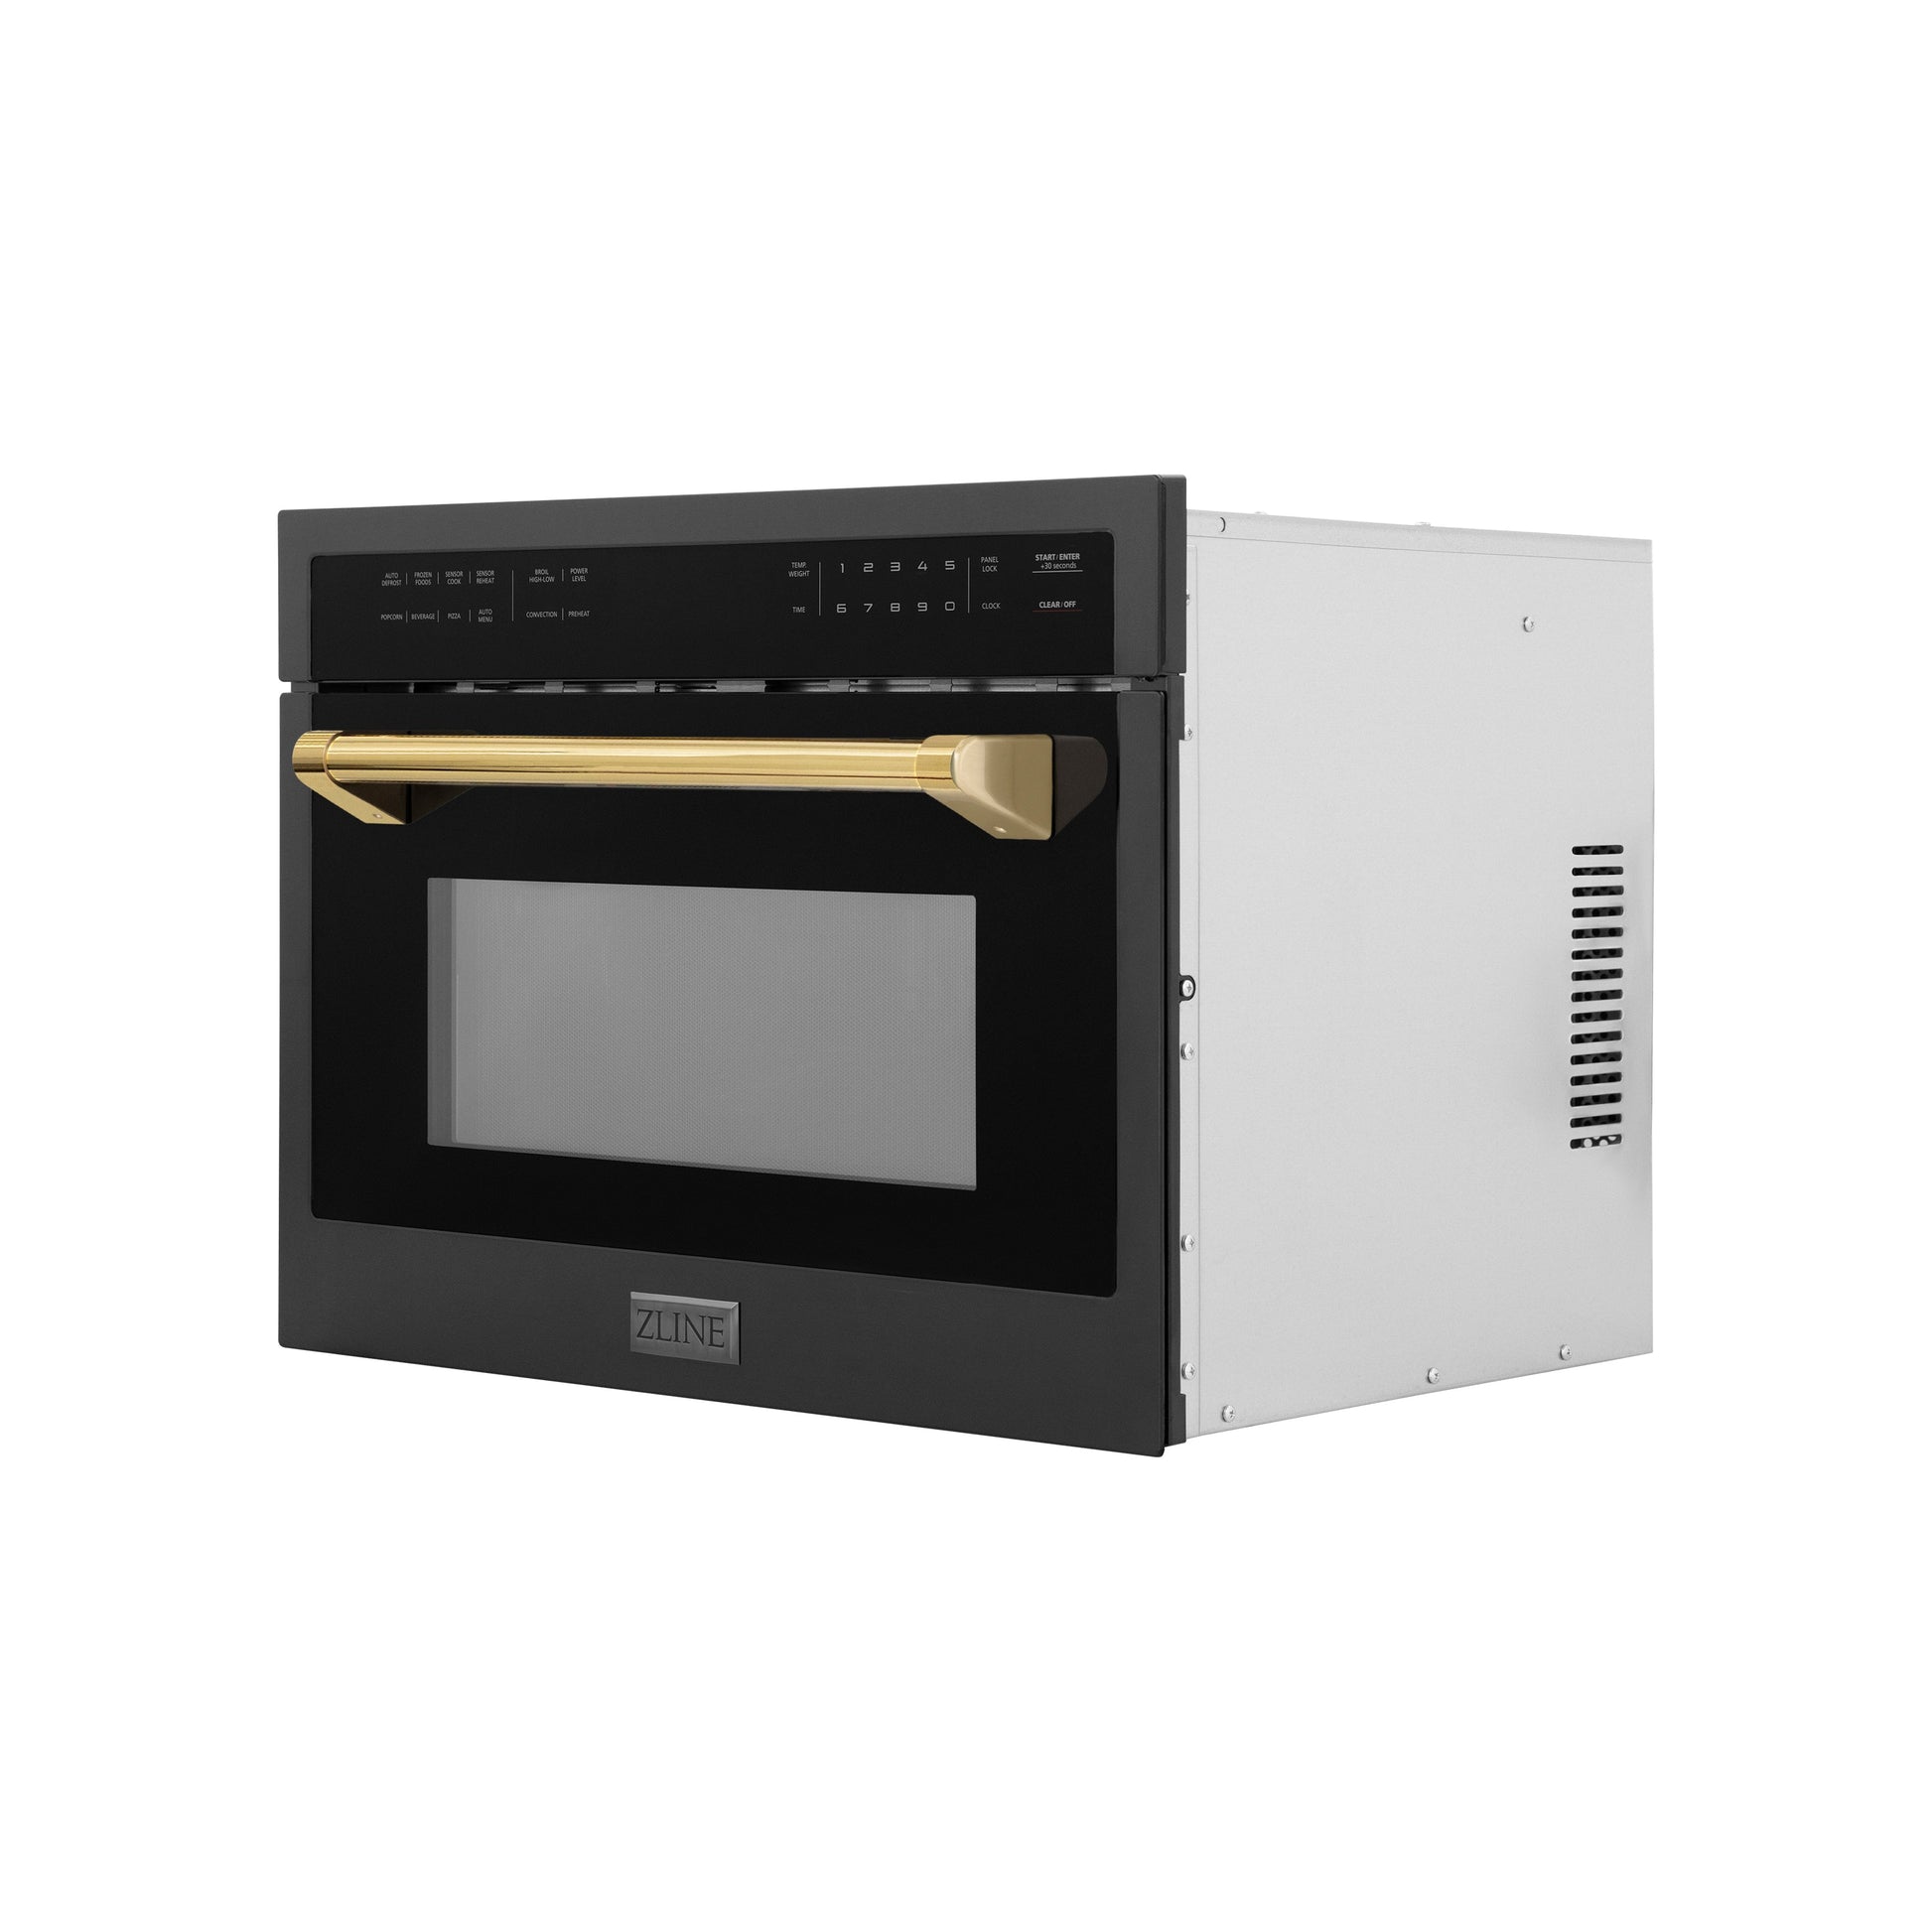 ZLINE Autograph Edition 24" Built-in Convection Microwave Oven - Black Stainless Steel with Accents